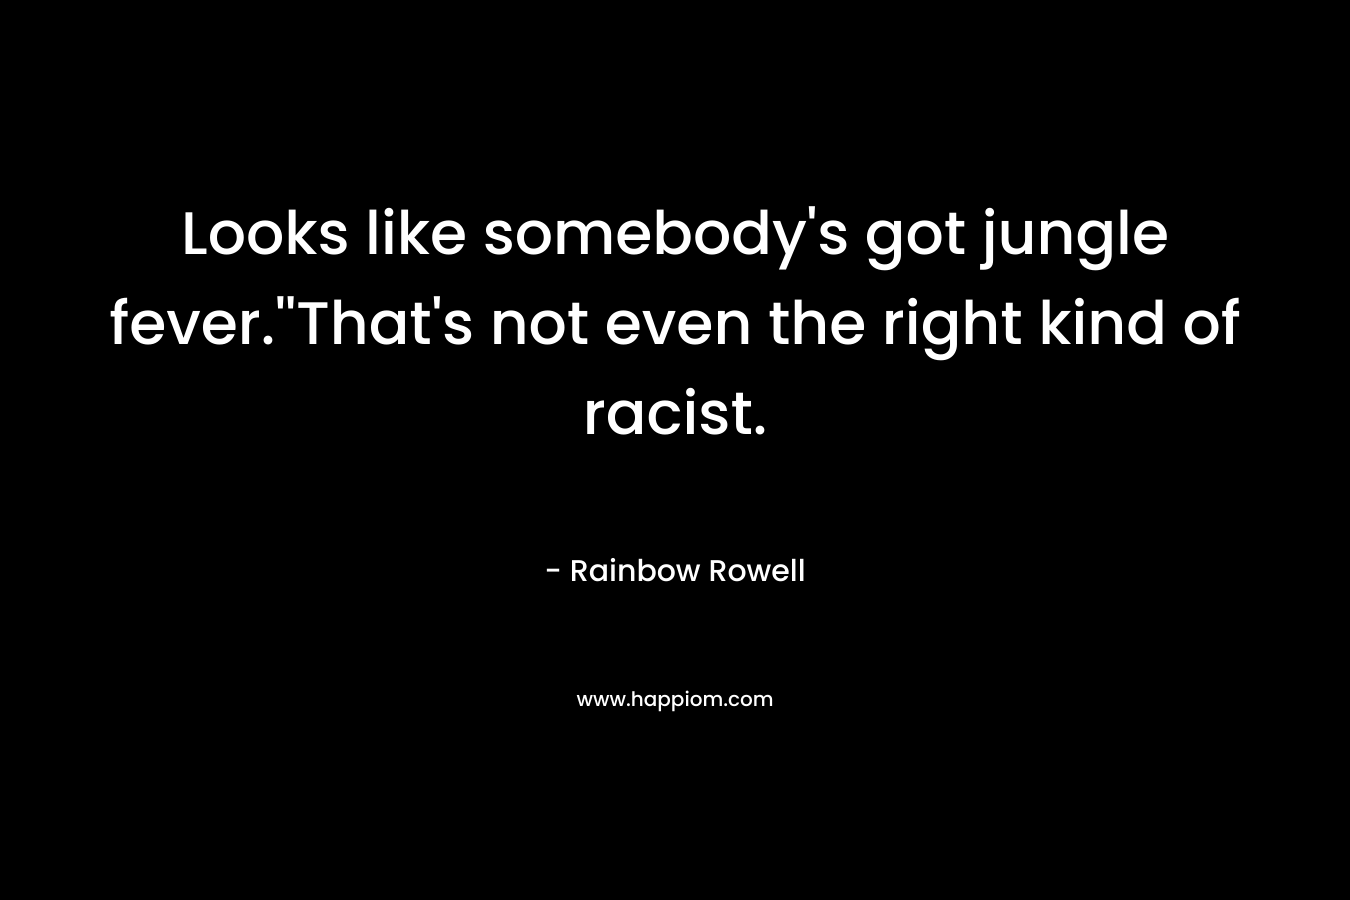 Looks like somebody’s got jungle fever.”That’s not even the right kind of racist. – Rainbow Rowell